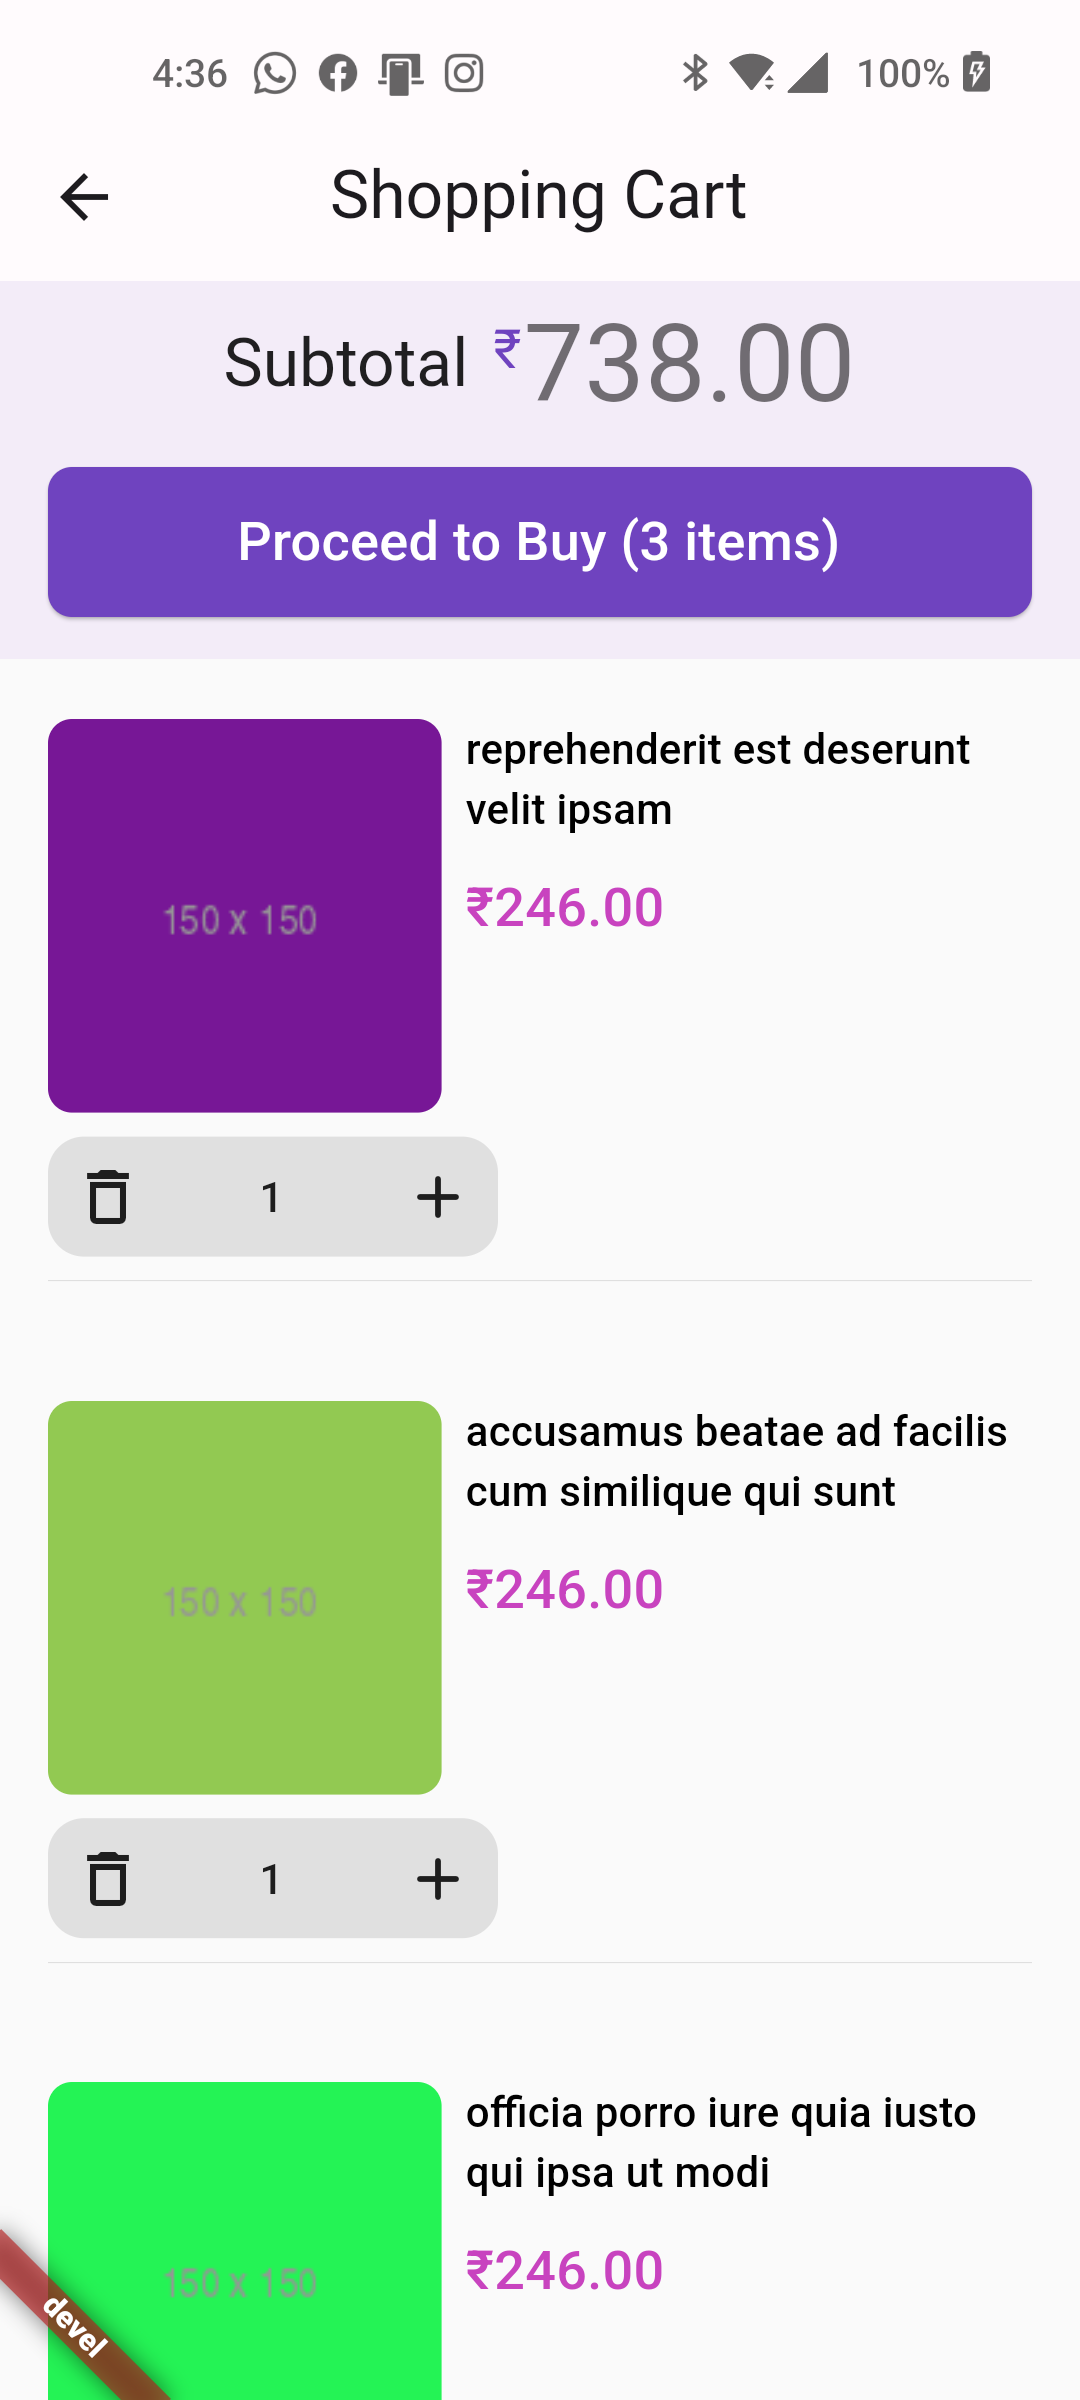 A simple demo shopping app experience. (Release APK available.)